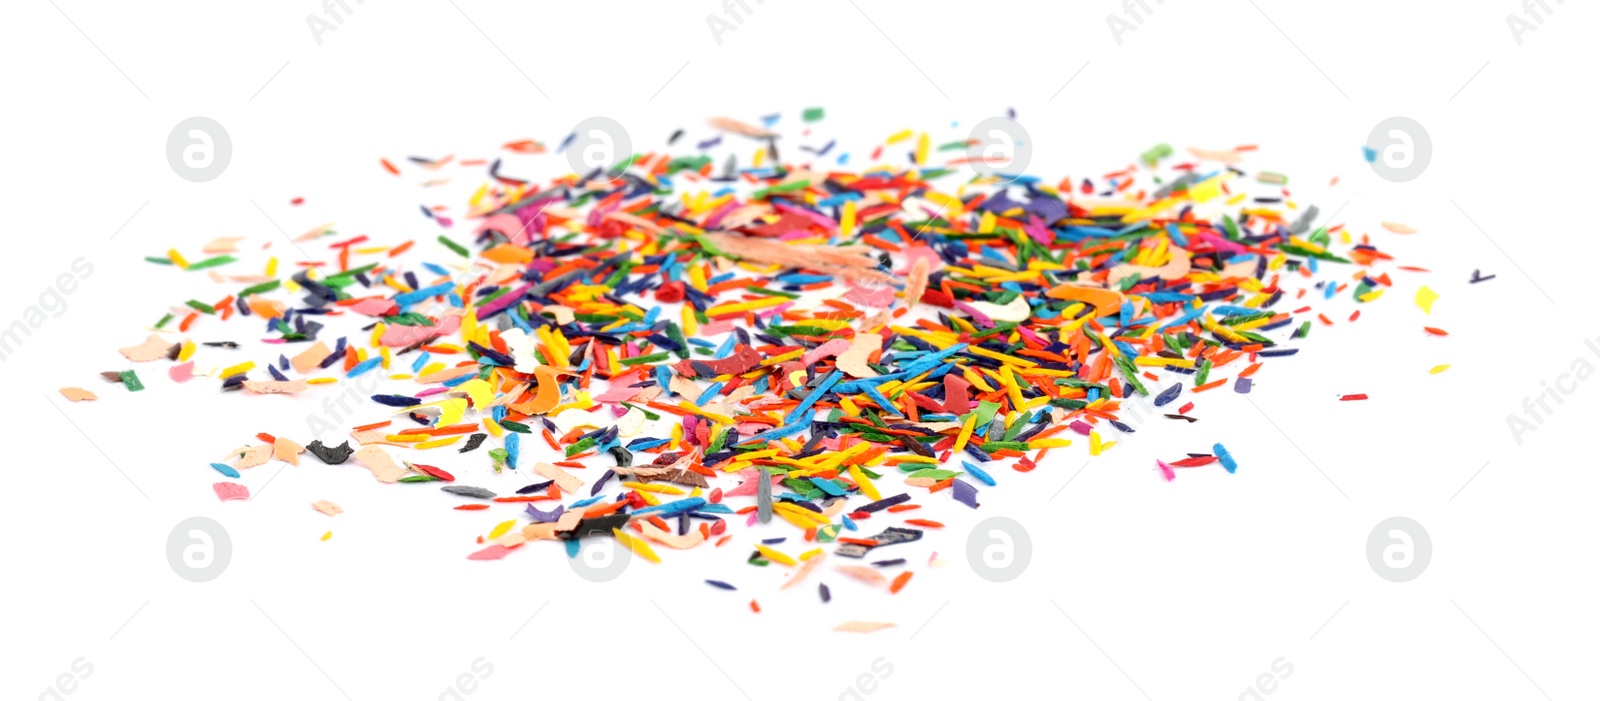 Photo of Colorful graphite crumbs on white background. Pencil sharpening